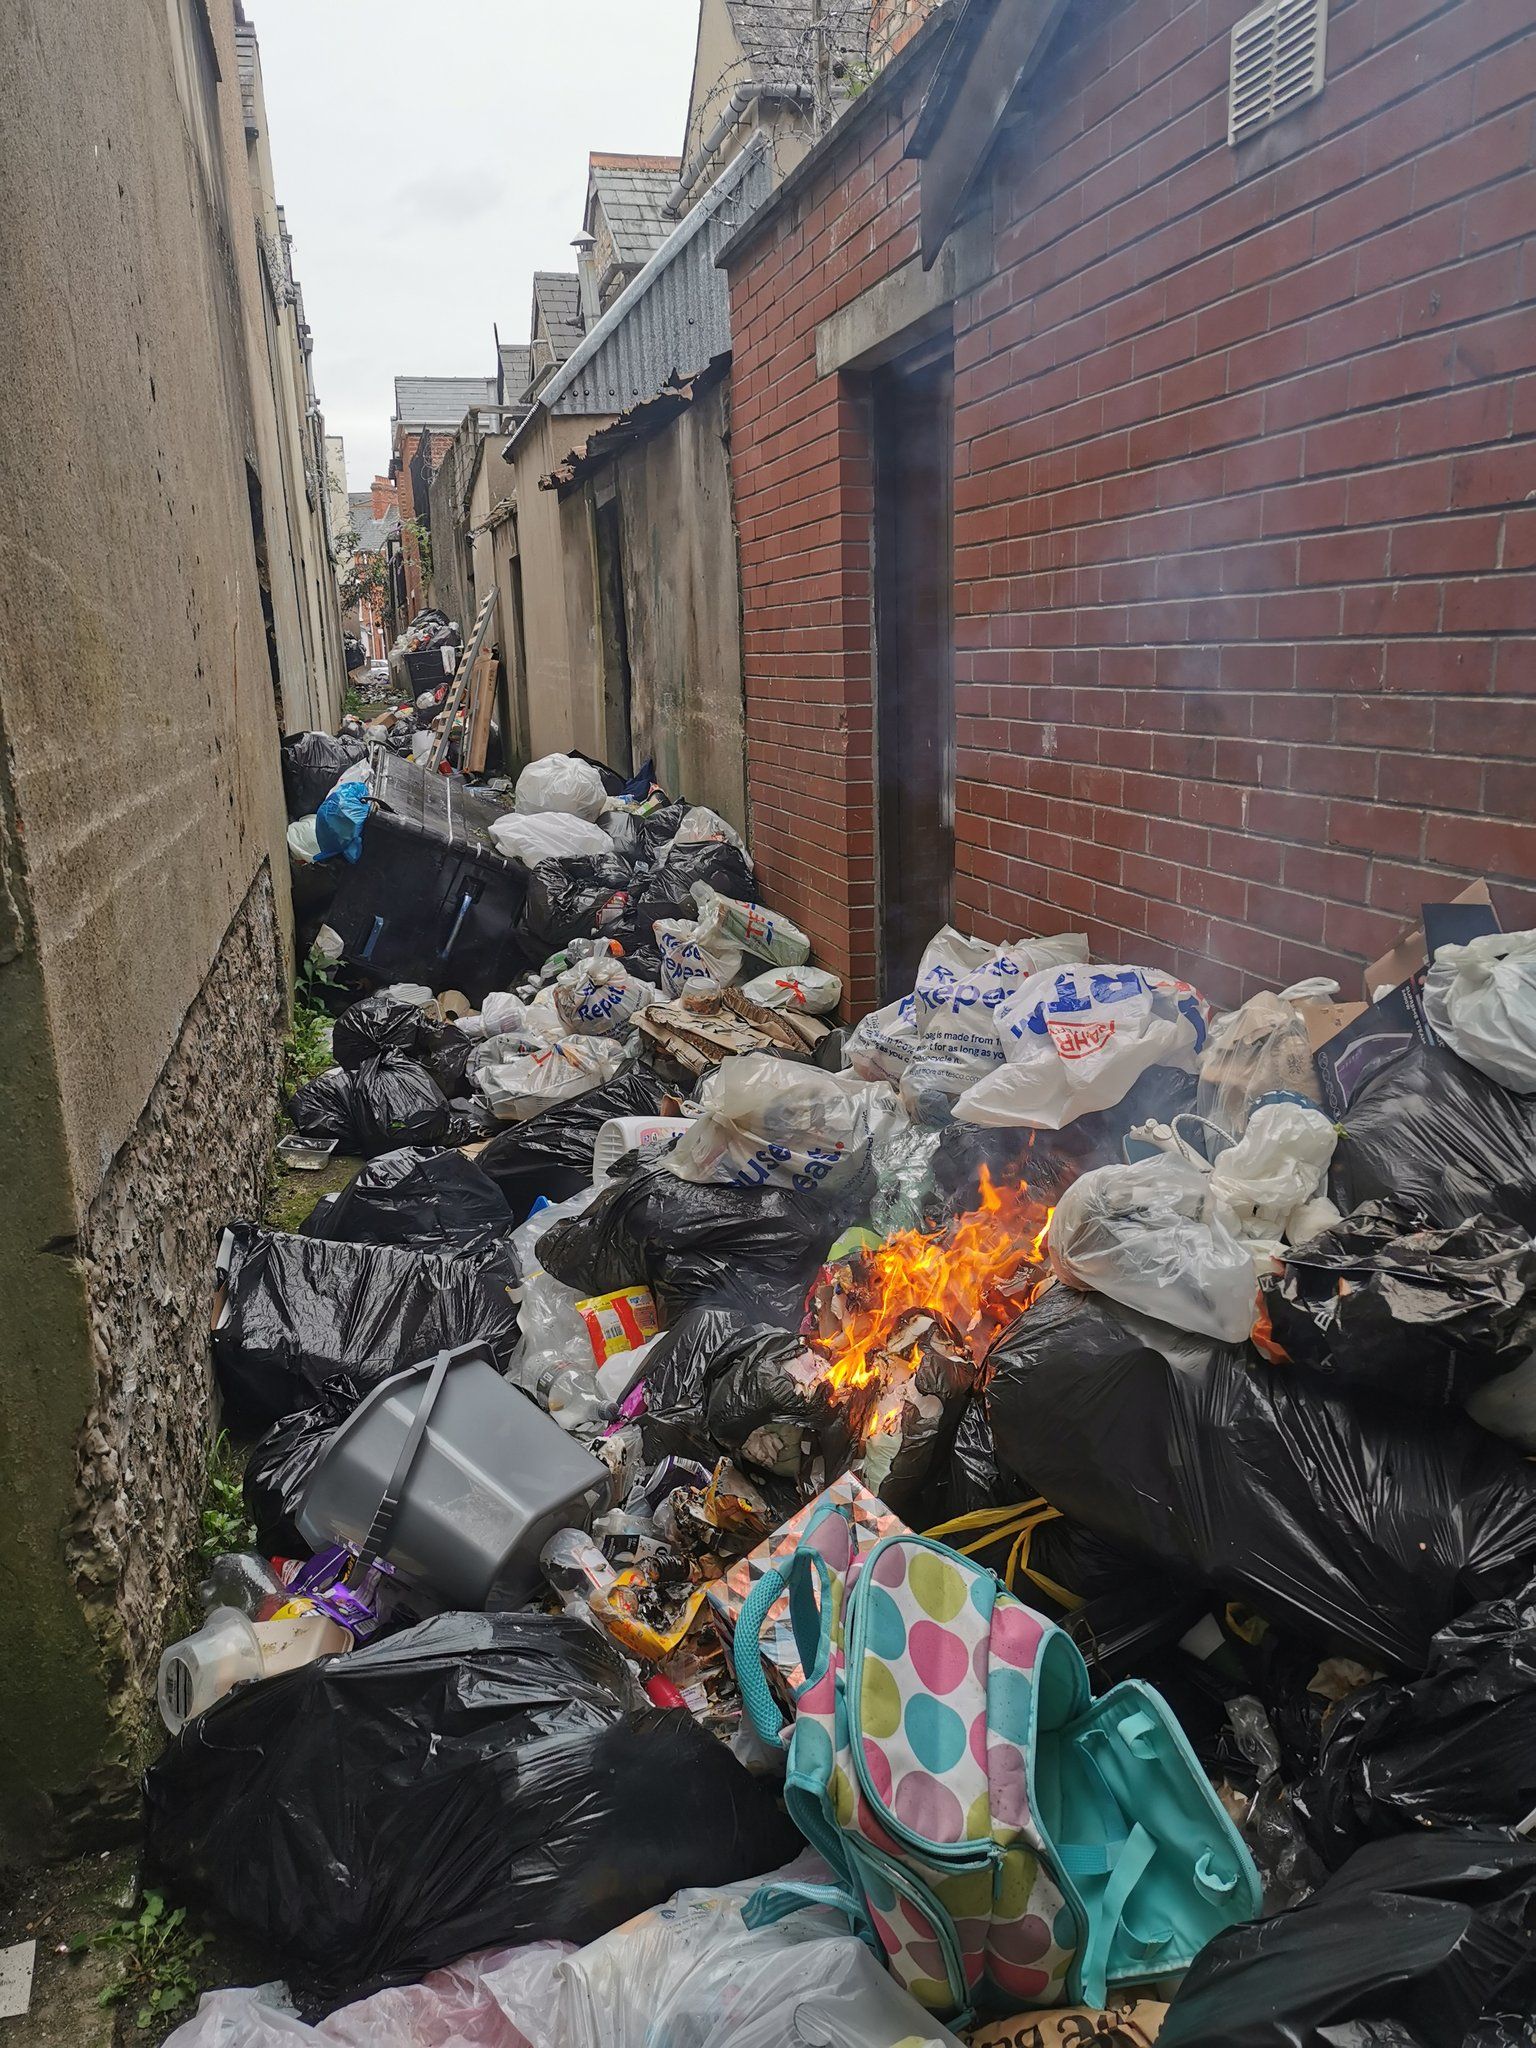 CLEAR-OUTS: Landlords are dumping at the back of their properties, claims Paula Bradshaw